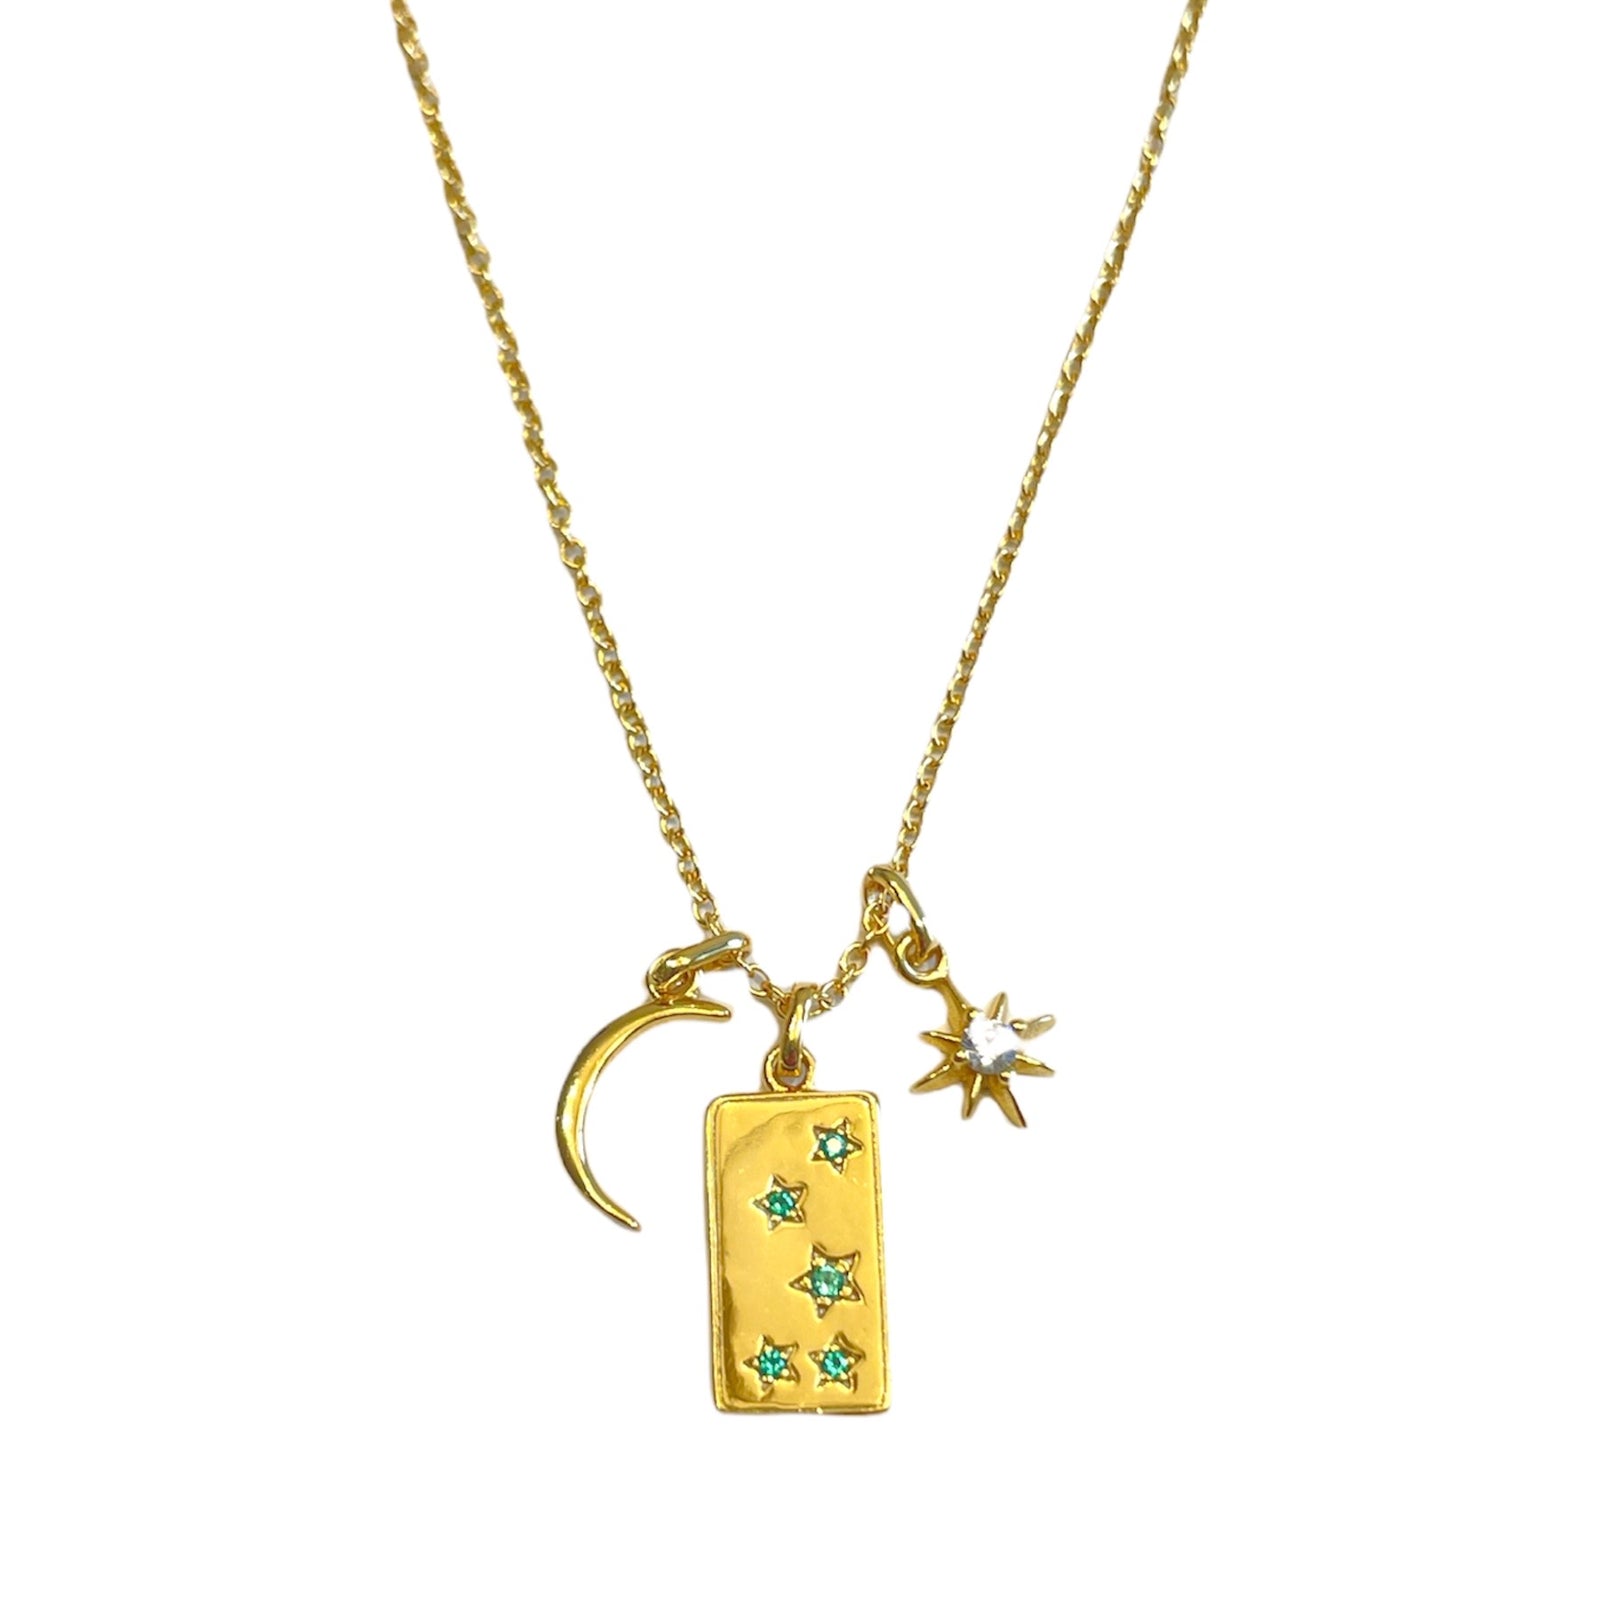 3 Charms necklace